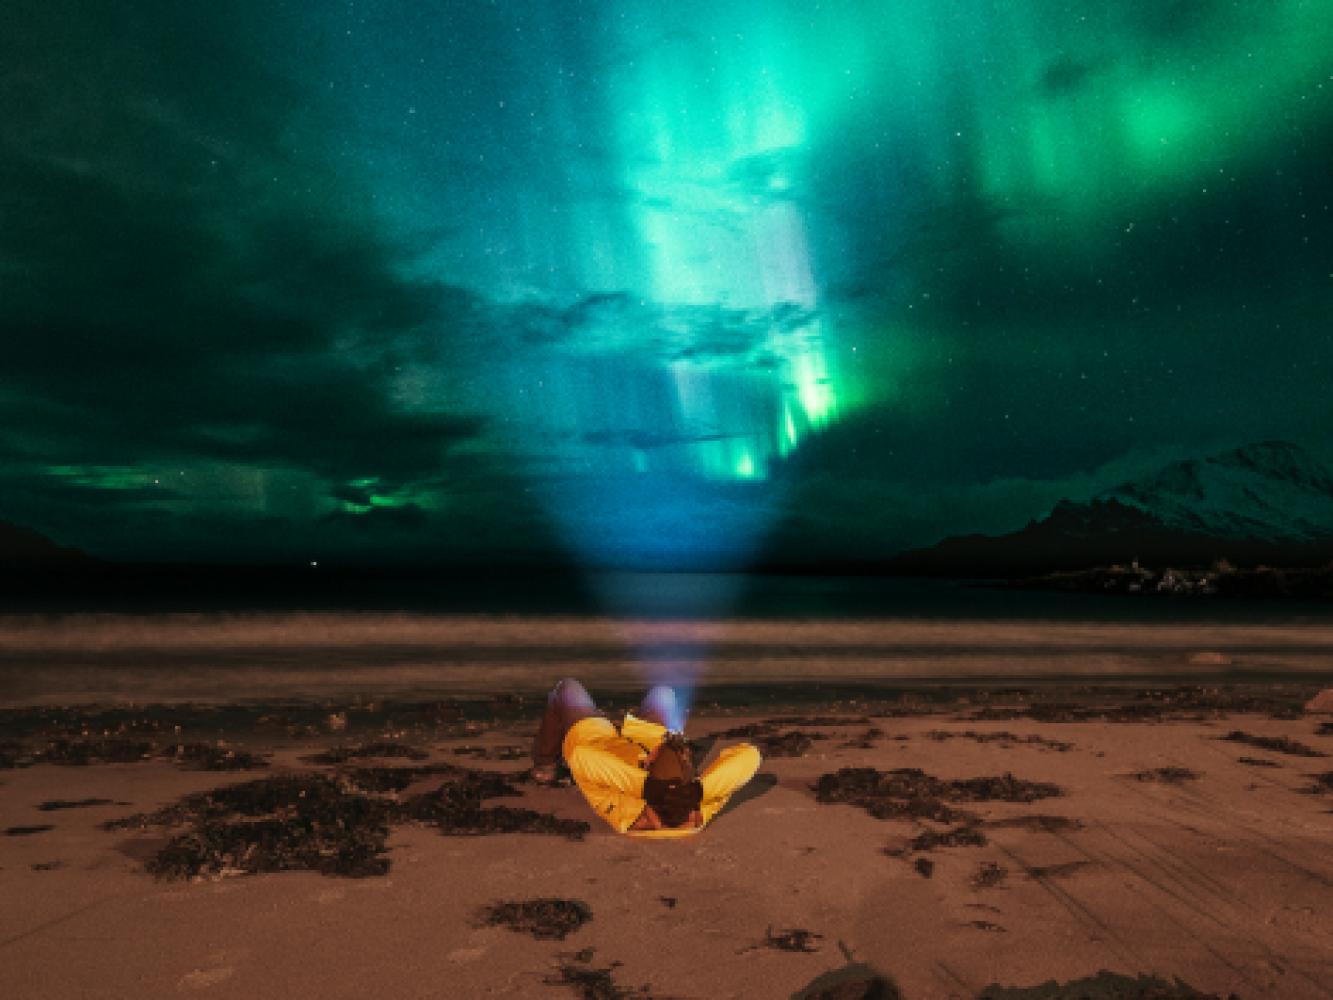 Enjoying the northern lights from a beach in the Tromso region